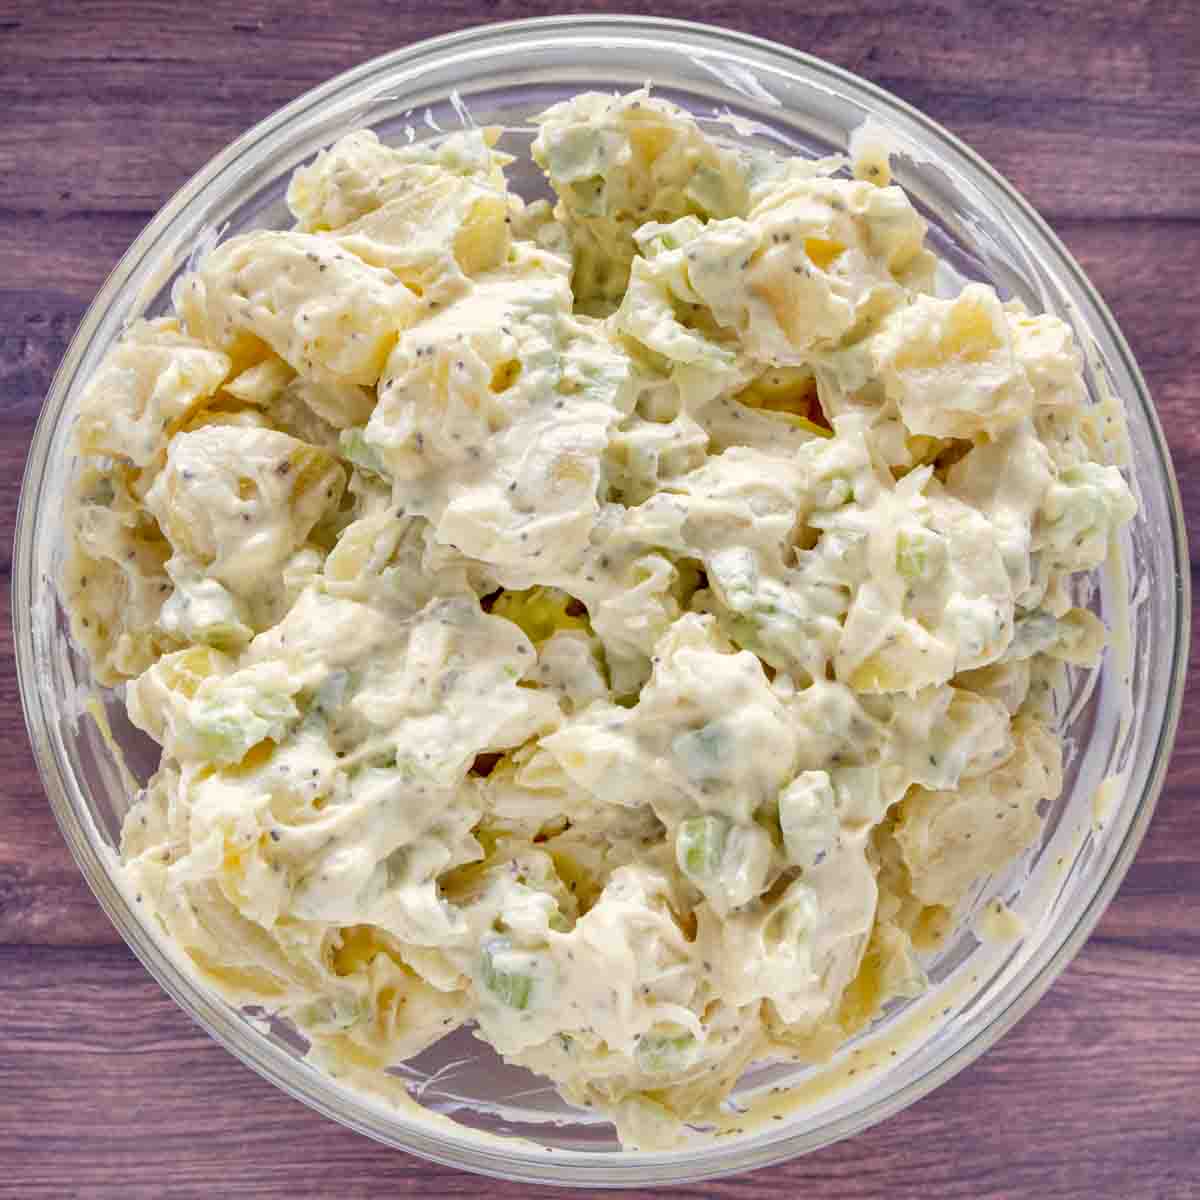 finished potato salad in a glass bowl.